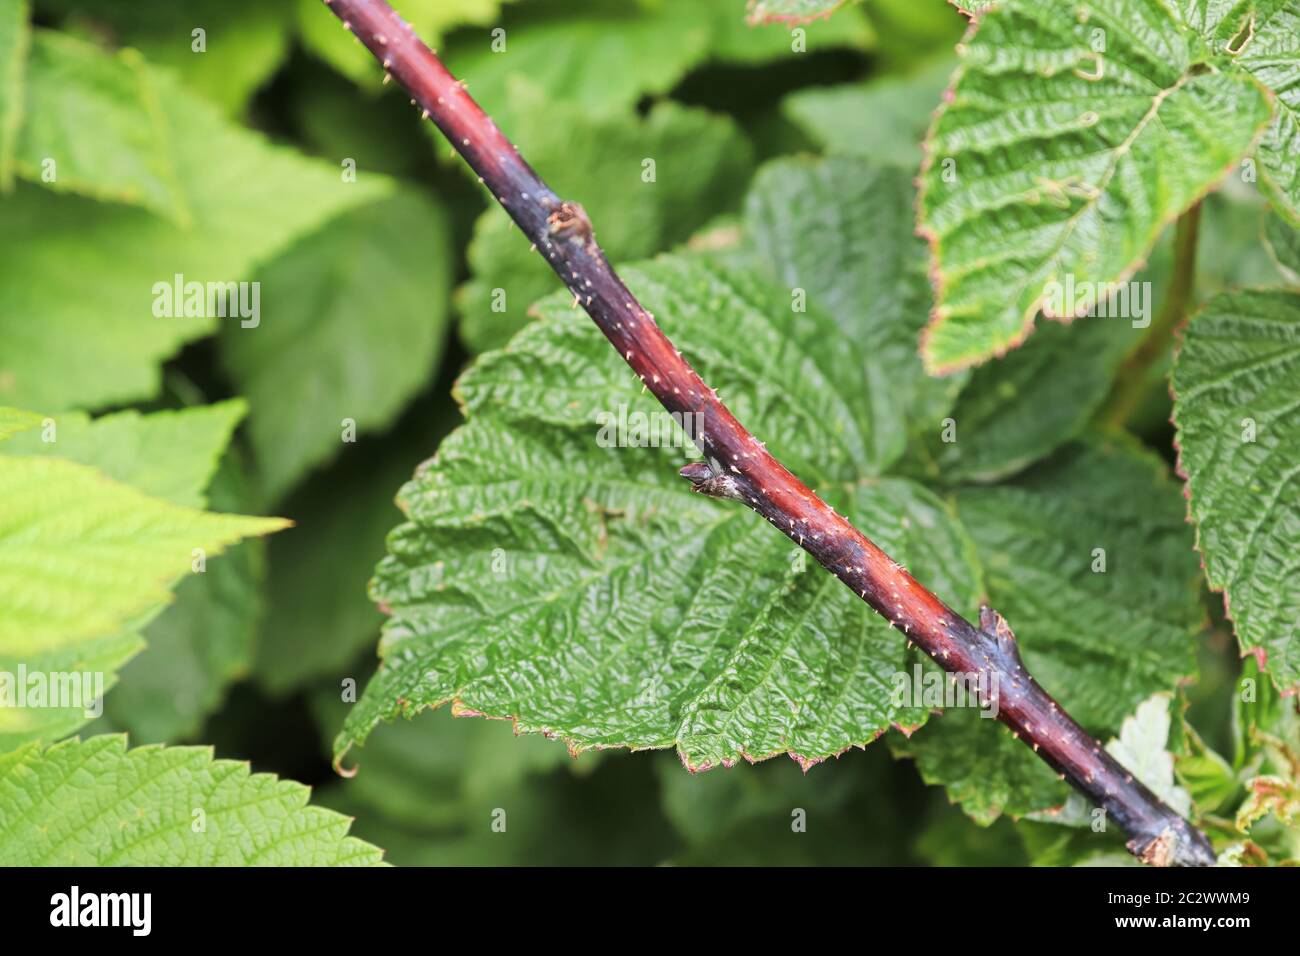 Closeup of a raspberry inflected with cane blight. Stock Photo